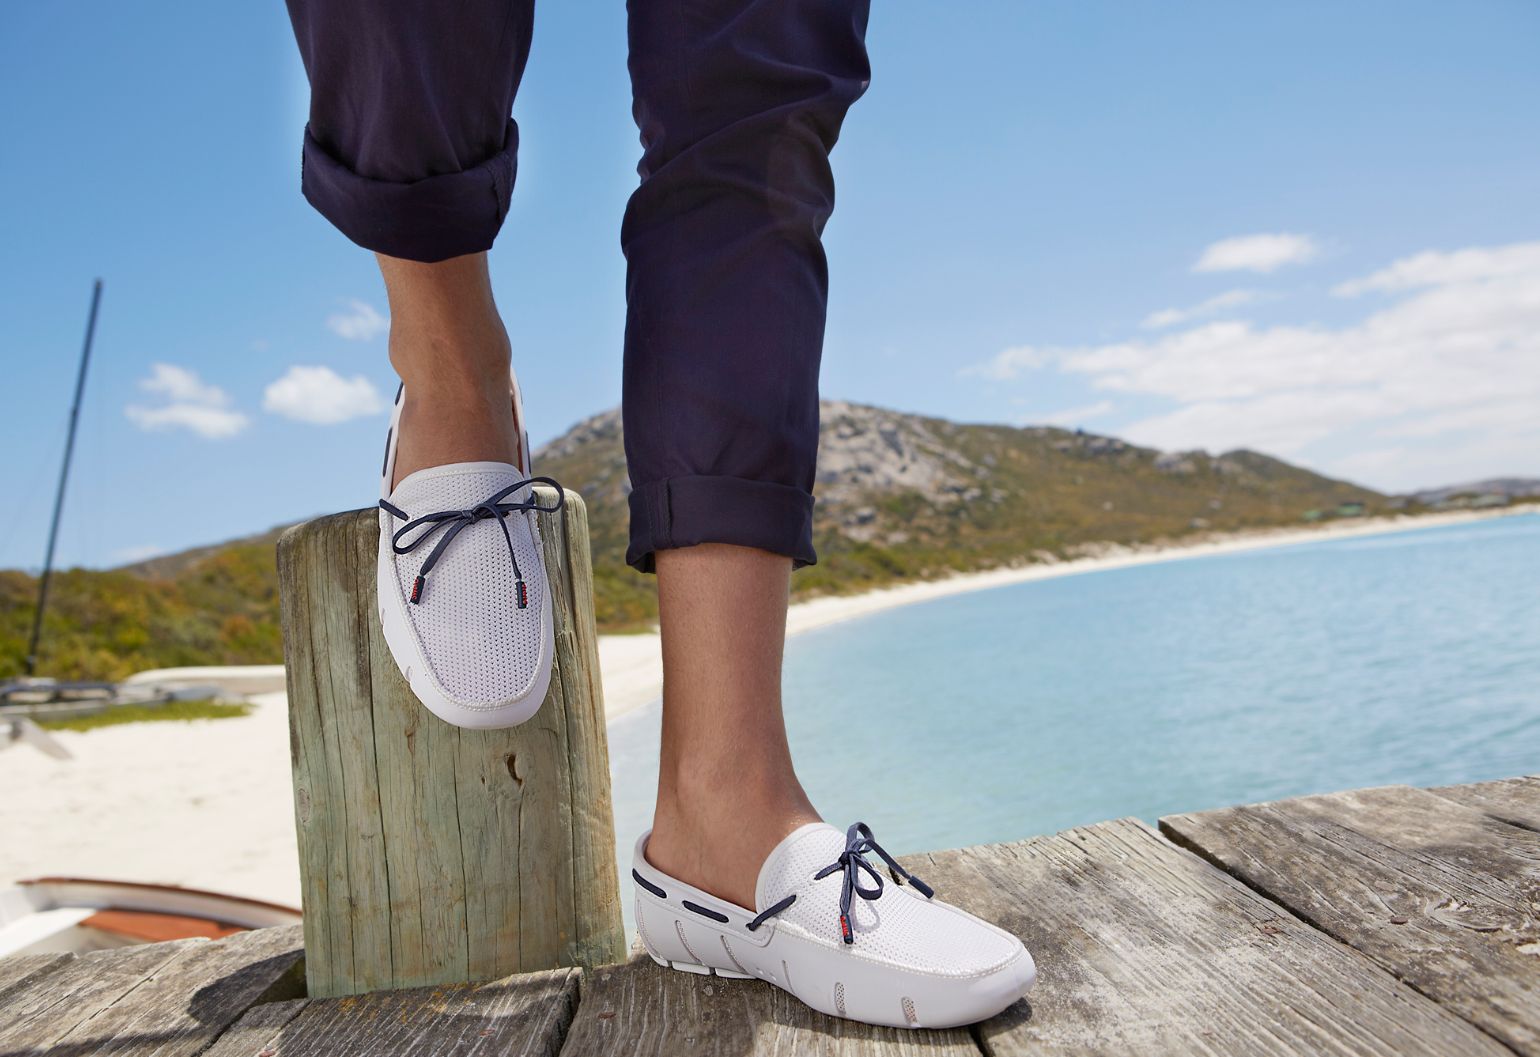 Waterproof-Loafers-for-Spring-Summer-2013-season-by-SWIMS-11